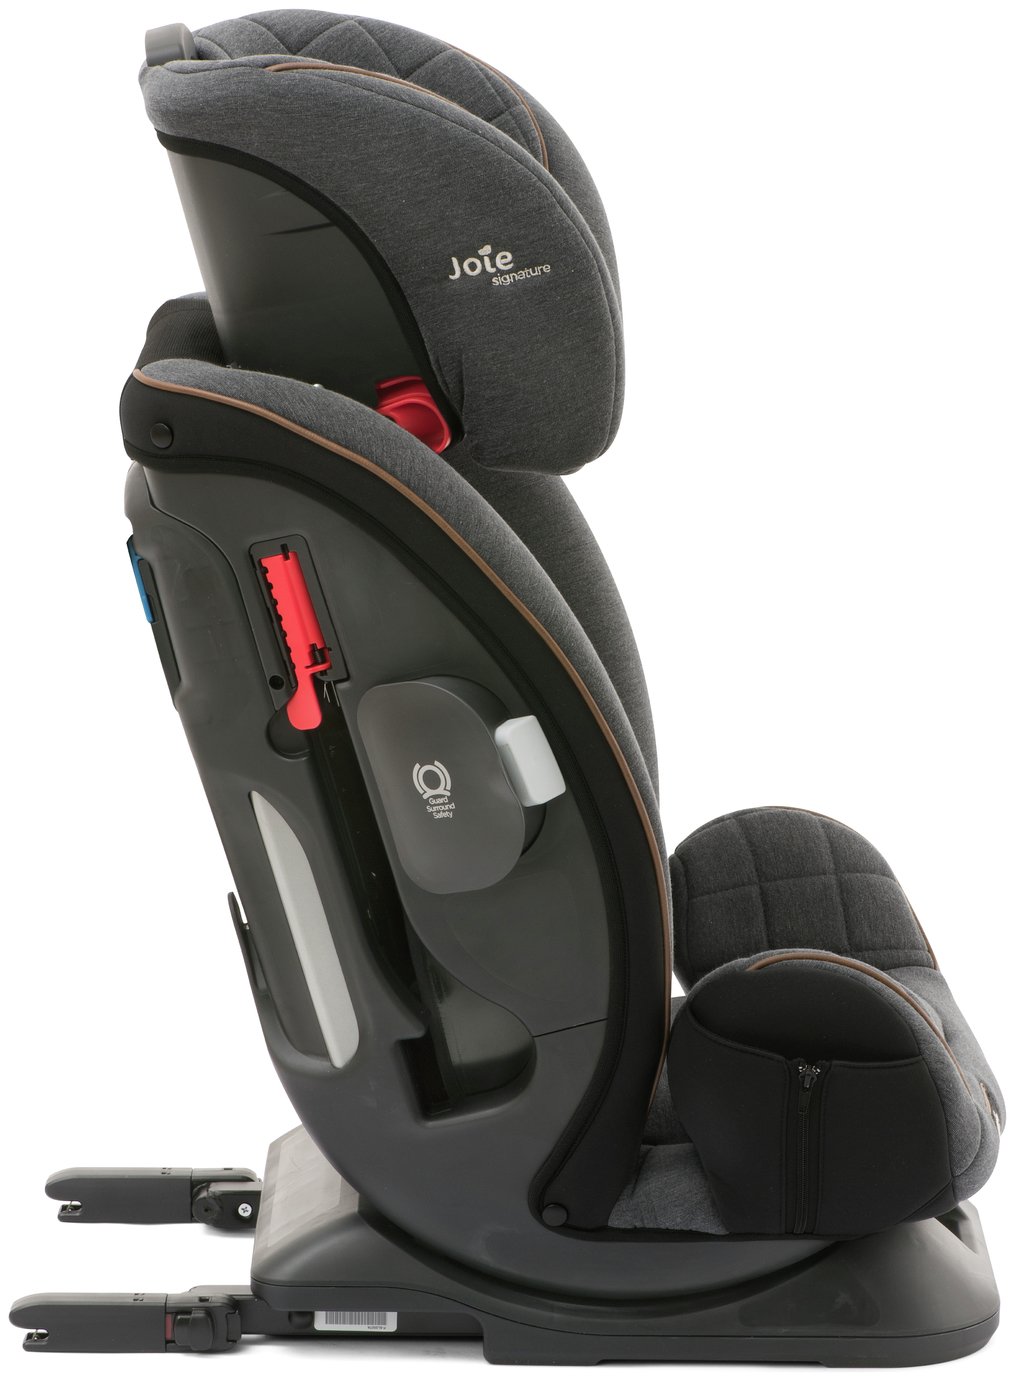 Joie Signature Every Stage FX Car Seat Reviews